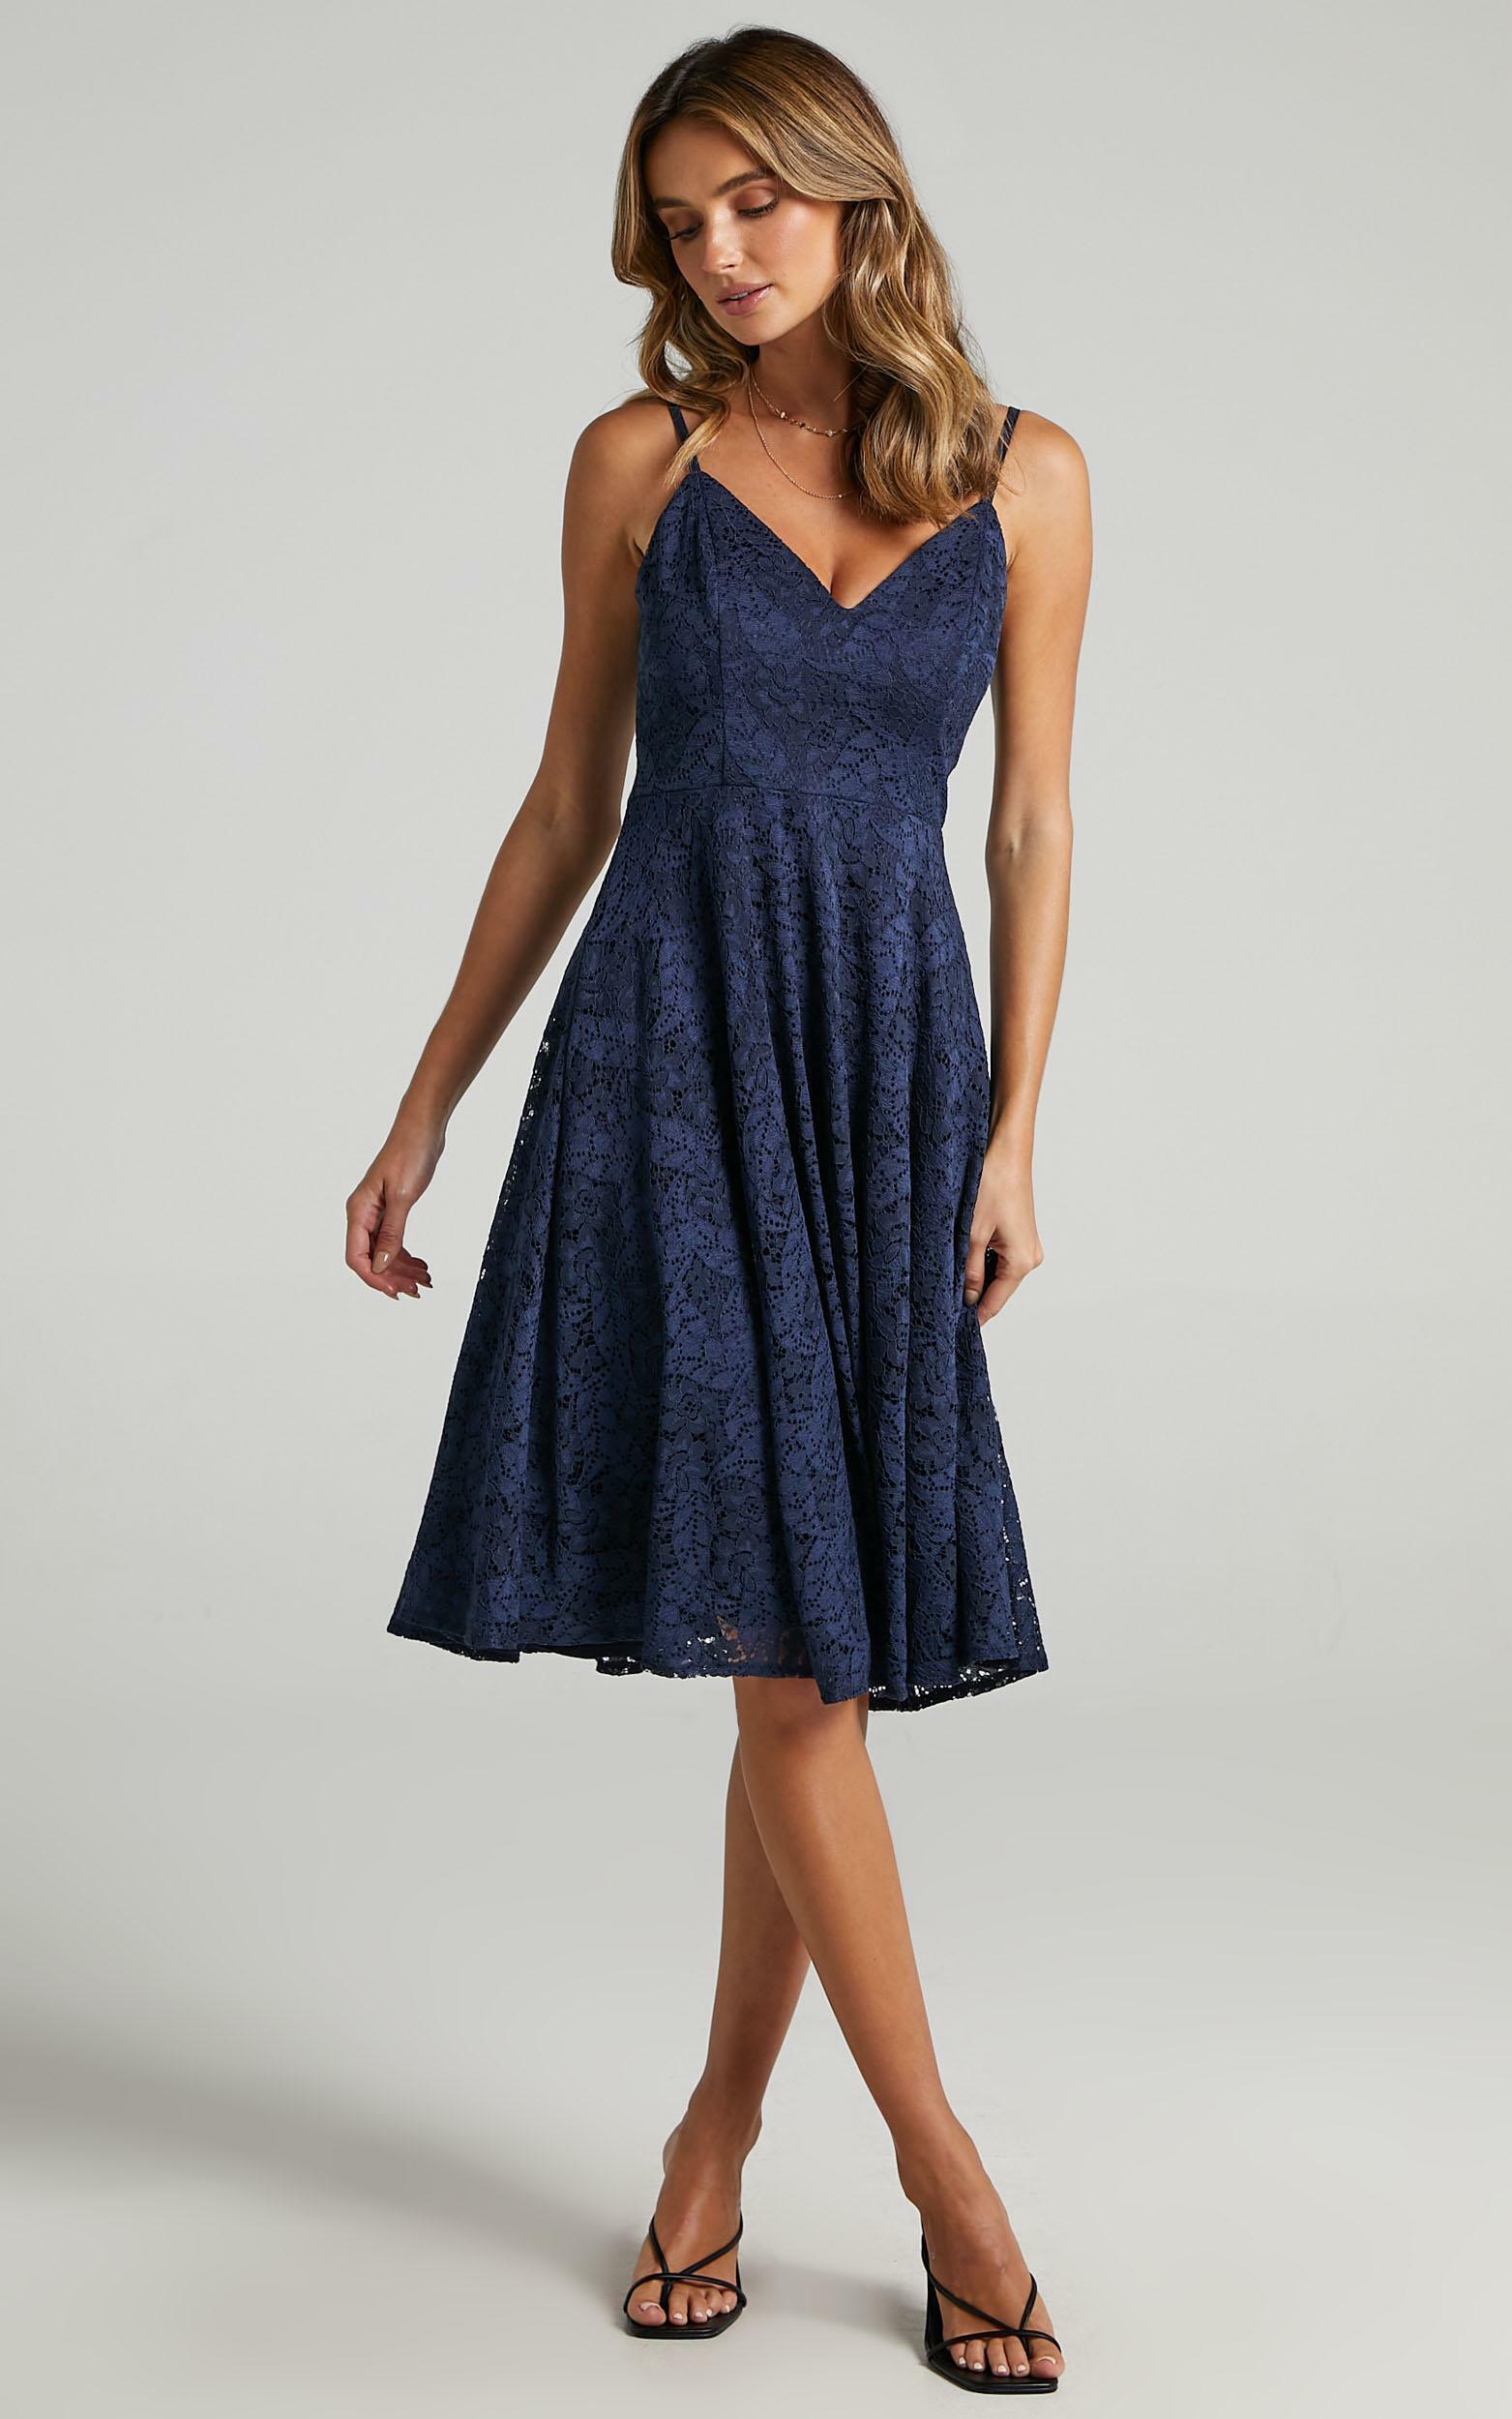 Far Beyond Dress in Navy Lace - 20, NVY2, hi-res image number null